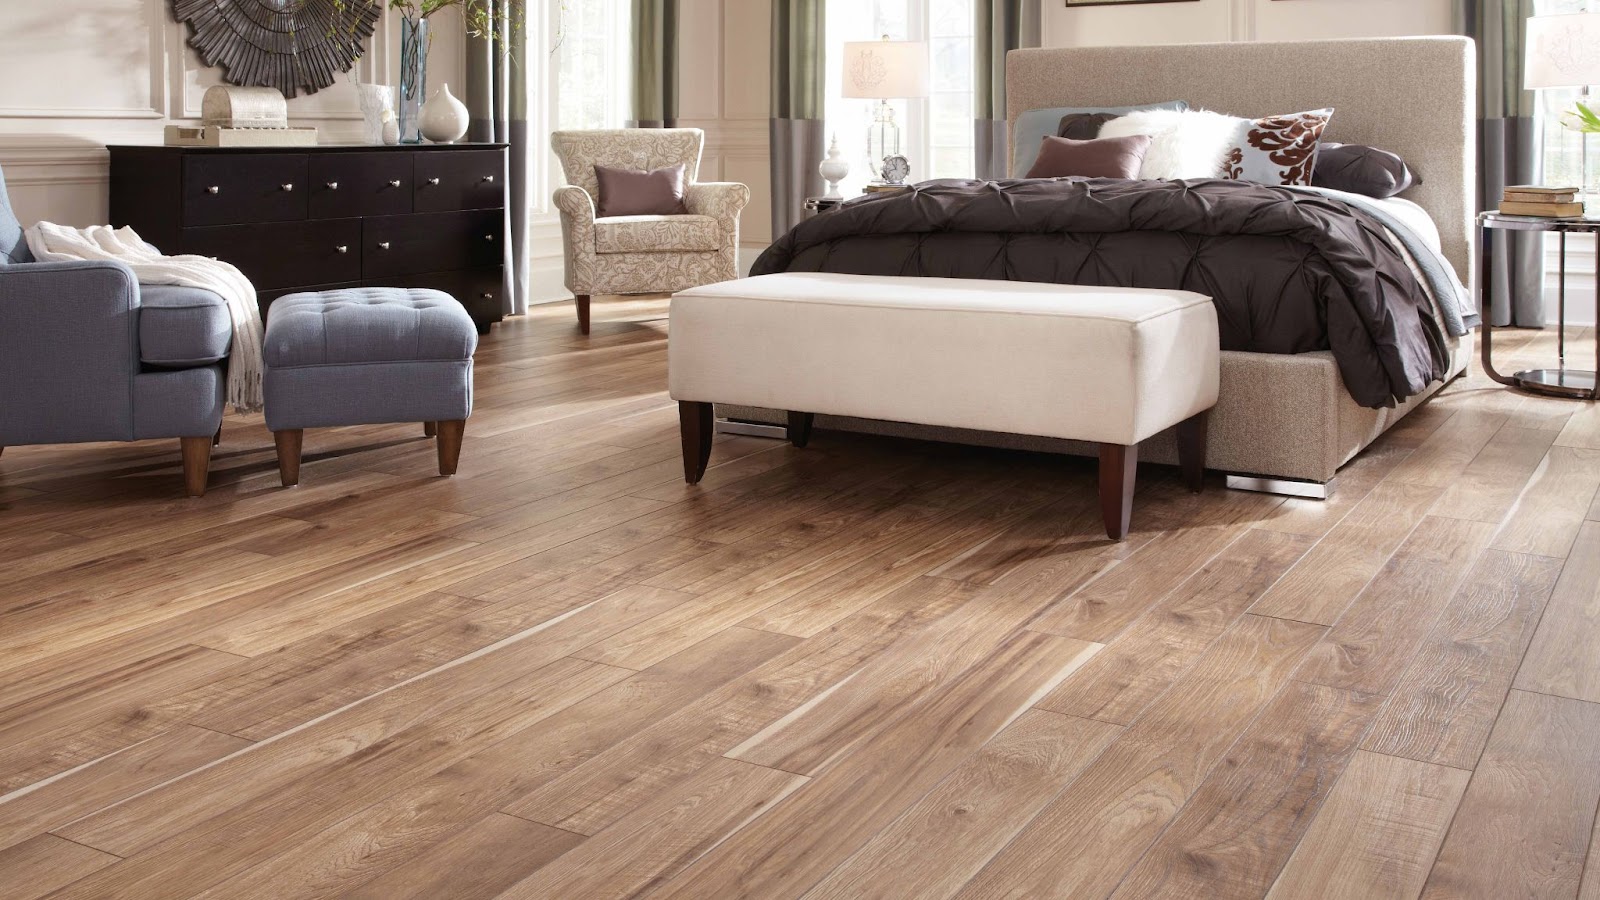 Laminate flooring in a bedroom, installation services available.